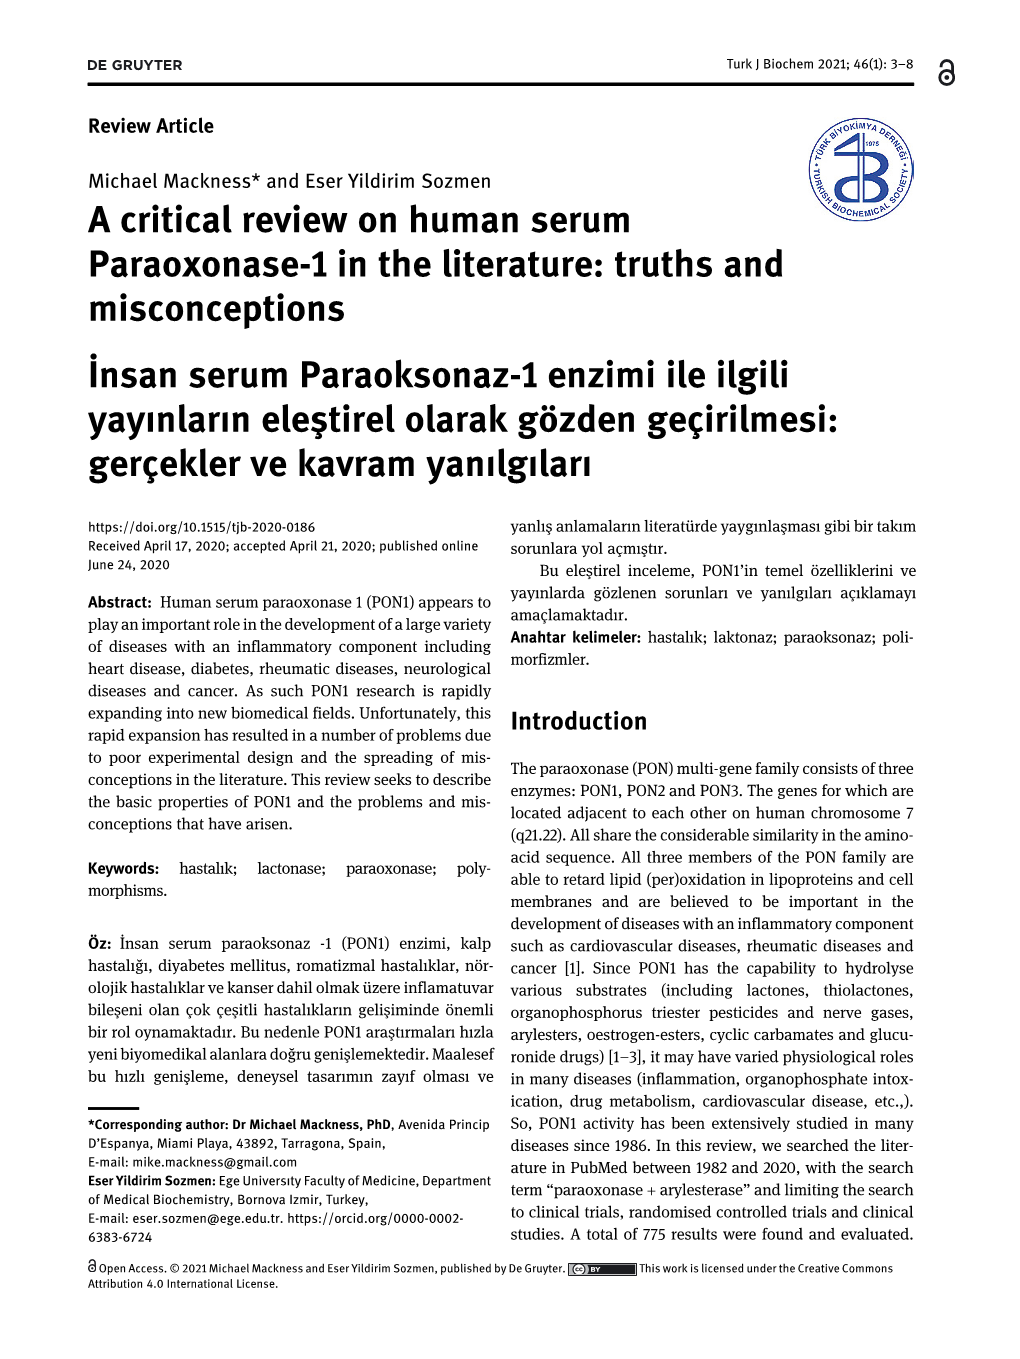 A Critical Review on Human Serum